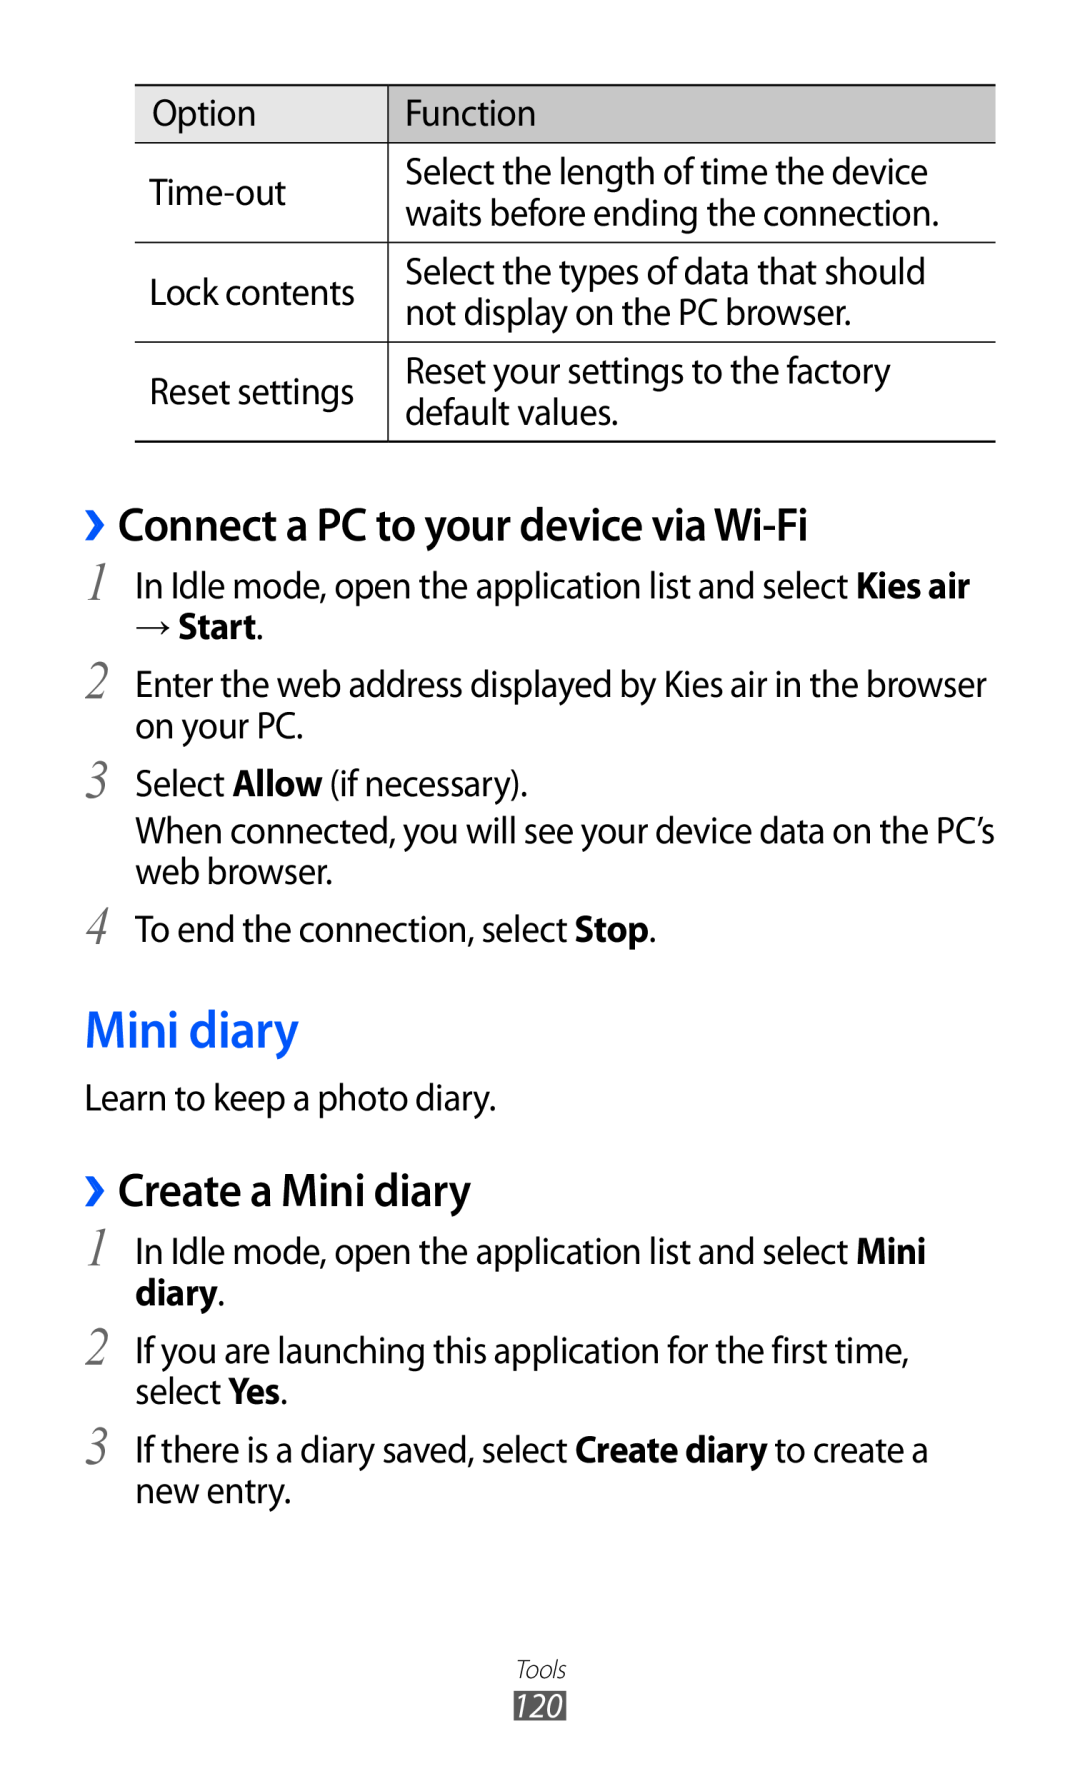 Samsung GT-I9070 user manual ››Connect a PC to your device via Wi-Fi, ››Create a Mini diary 